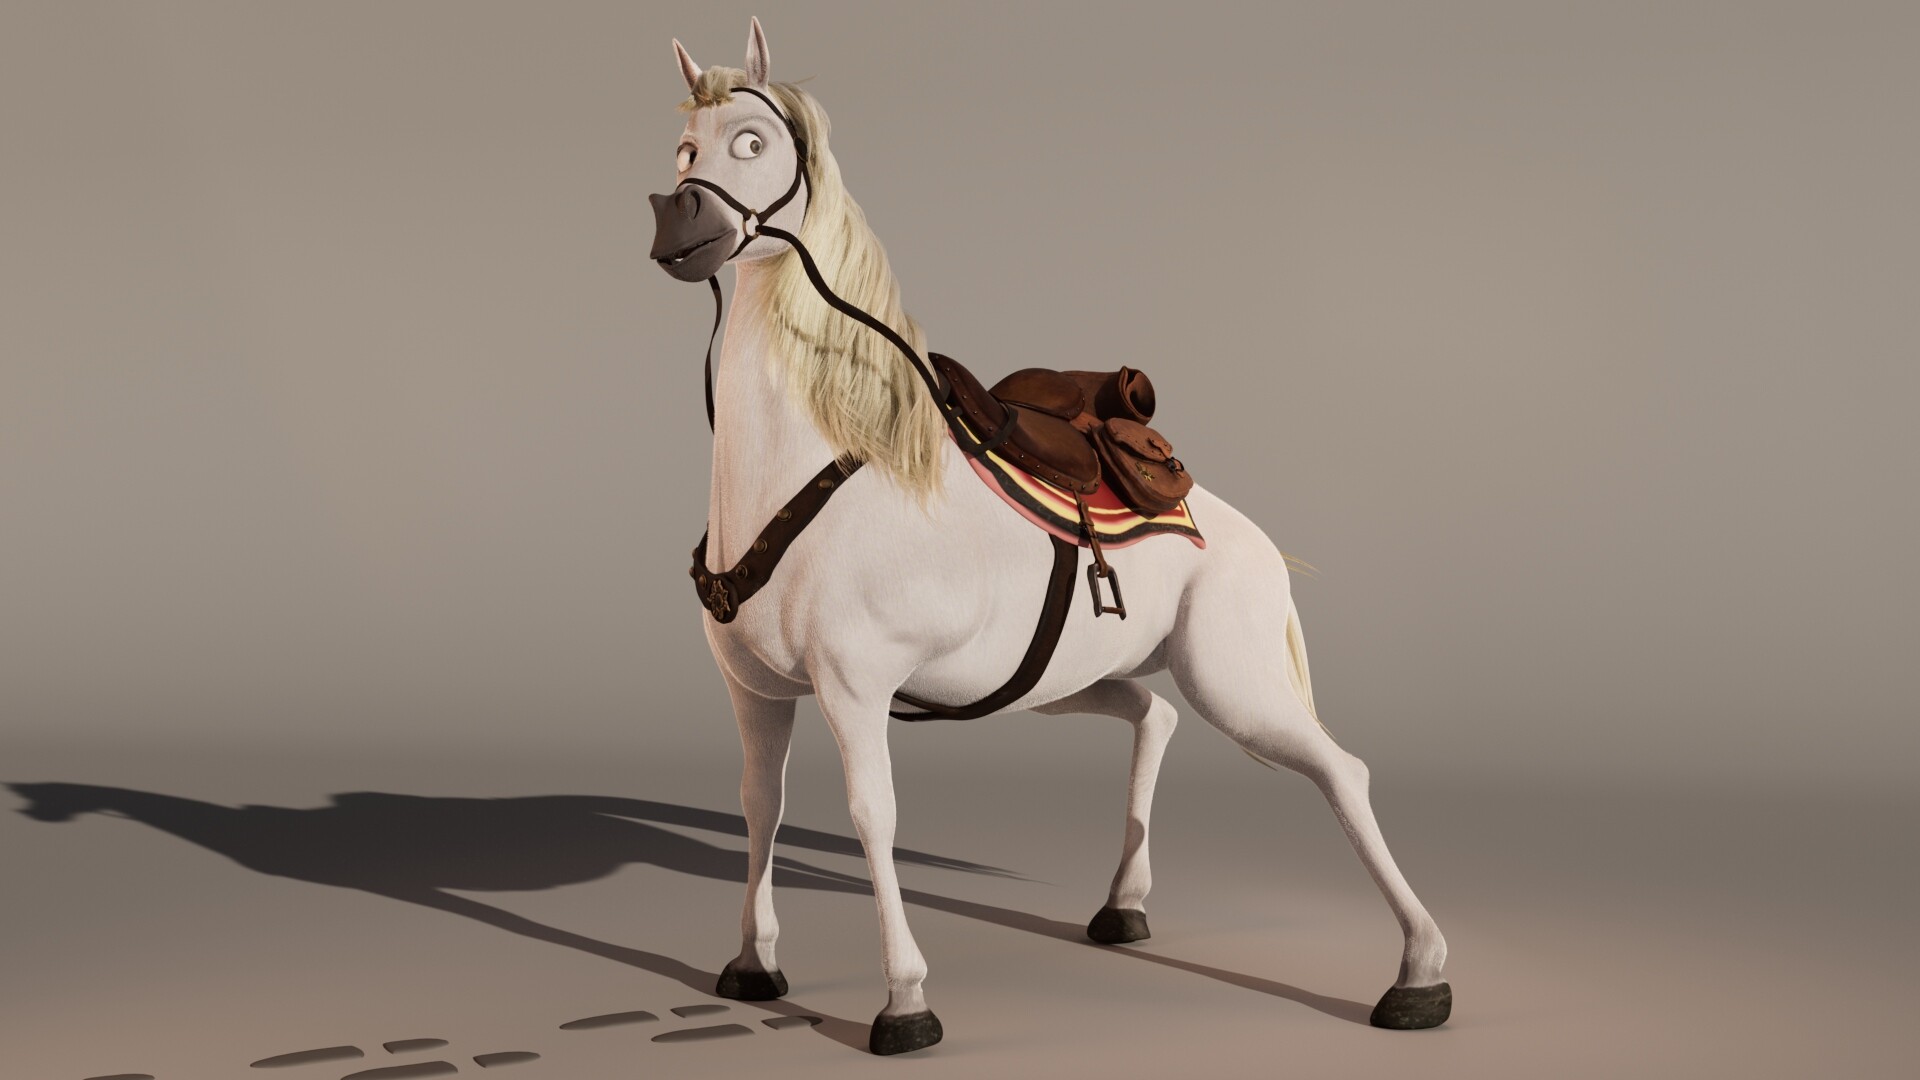 ArtStation - 3D Model and Animation Maximus, the horse - inspired by  Disney's movie 